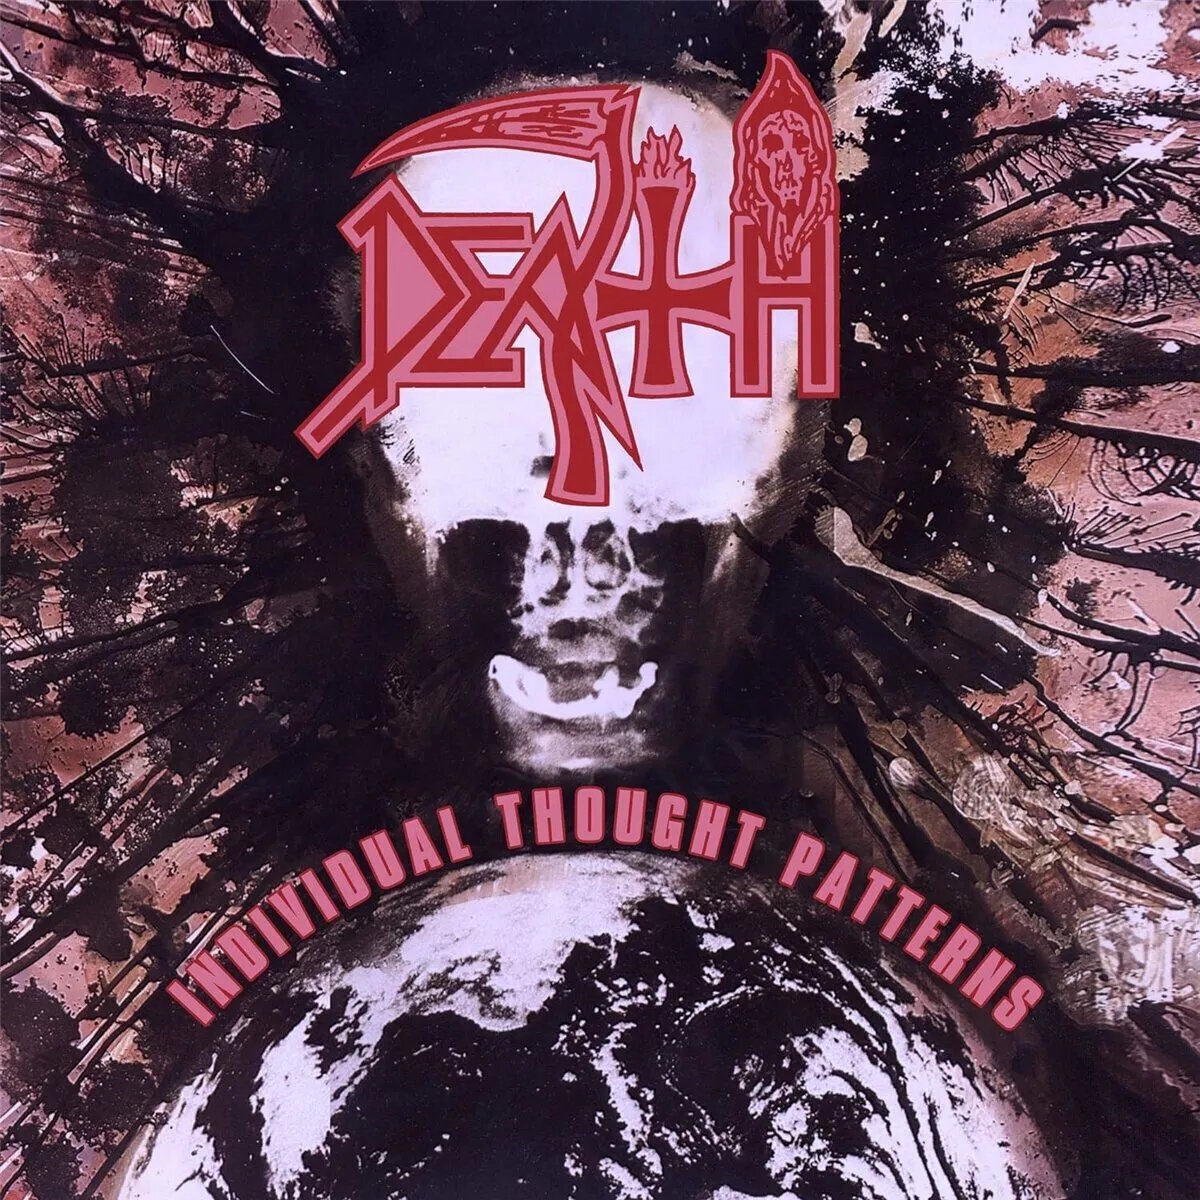 Vinylplade Death - Individual Thought Patterns (Tri Colour Merge Splatter Coloured) (Deluxe Edition) (Limited Edition) (Reissue) (Remastered) (LP)